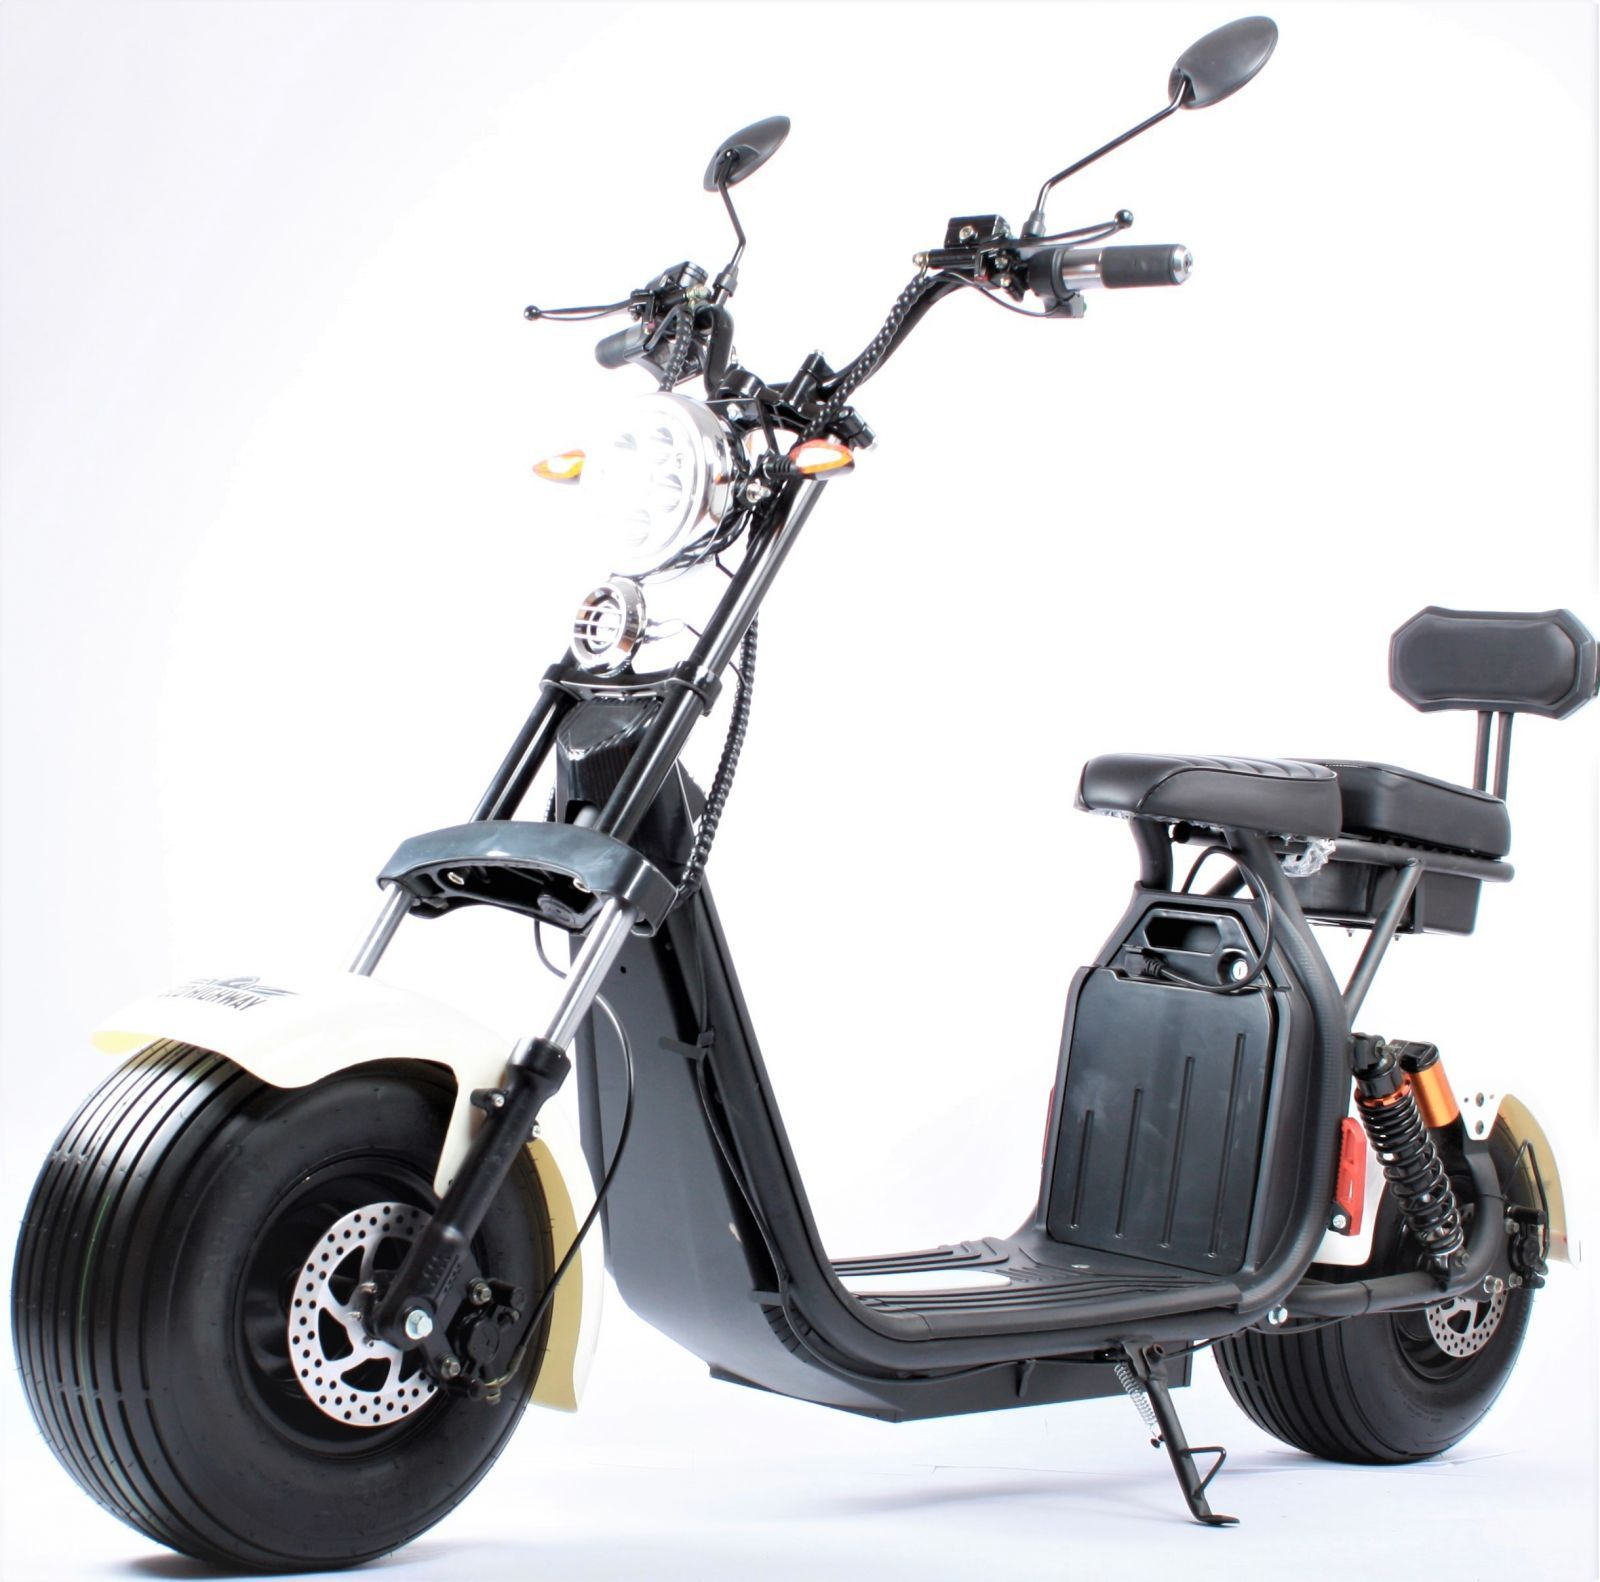 RCskladem ECO HIGHWAY Electric Scooter 2000W BLACK LINE A39Ywhite white